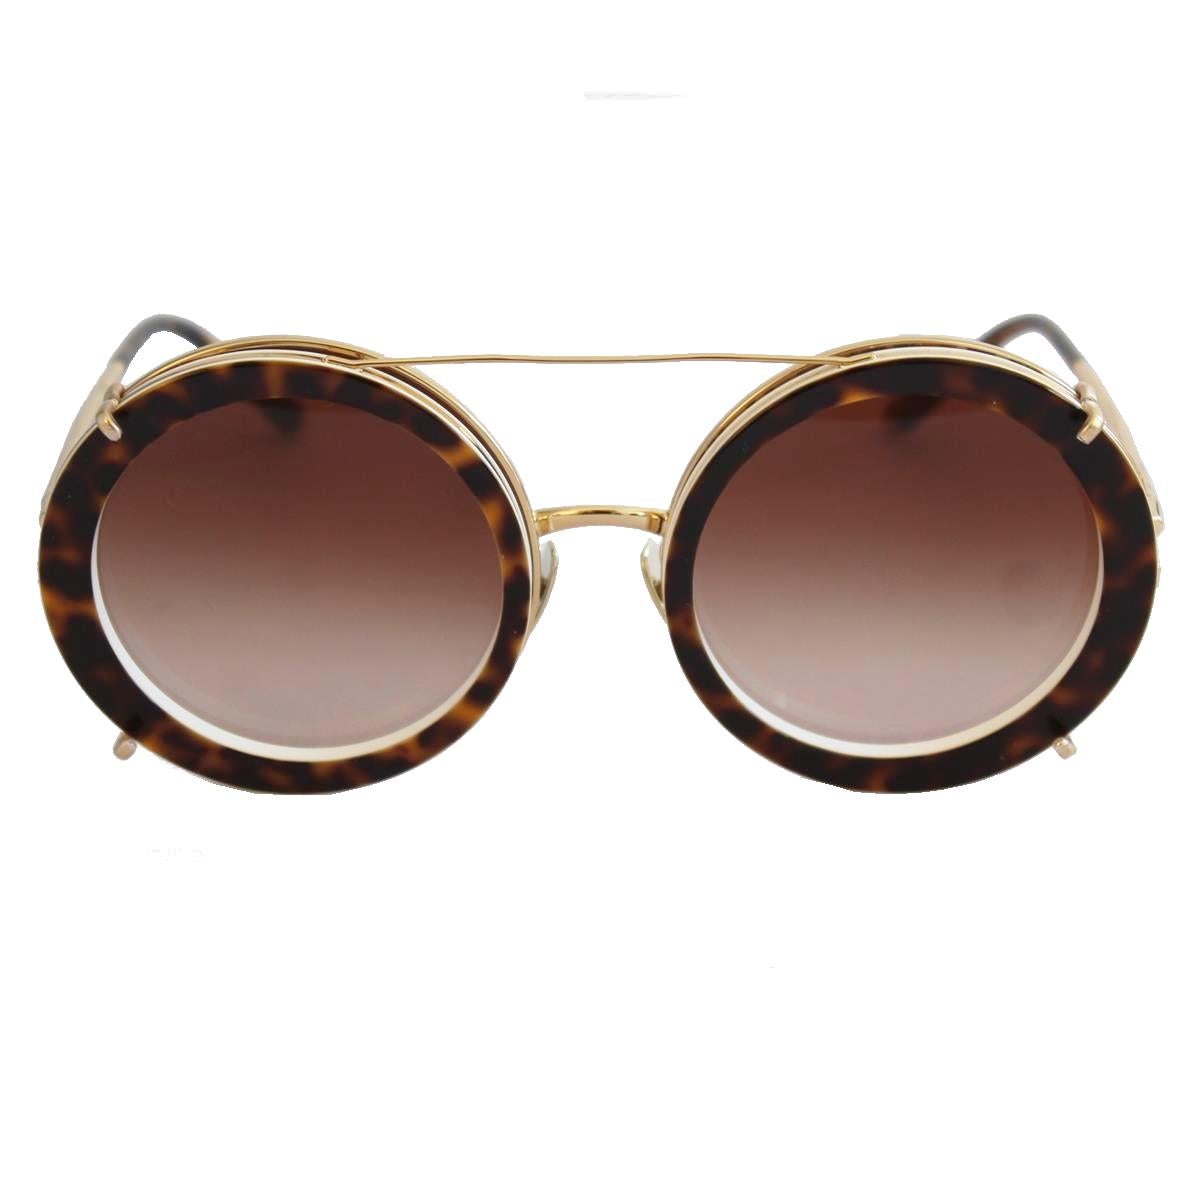 SS 2019
DG 2198
Round sunglasses in gold metal with gradient lenses
Three styles with just one frame
Havana and Sicilian majolica print
Dolce&Gabbana logo on temples
Adjustable nose pads 
Frame Color: Gold with majolica print on HAVANA base
Temple